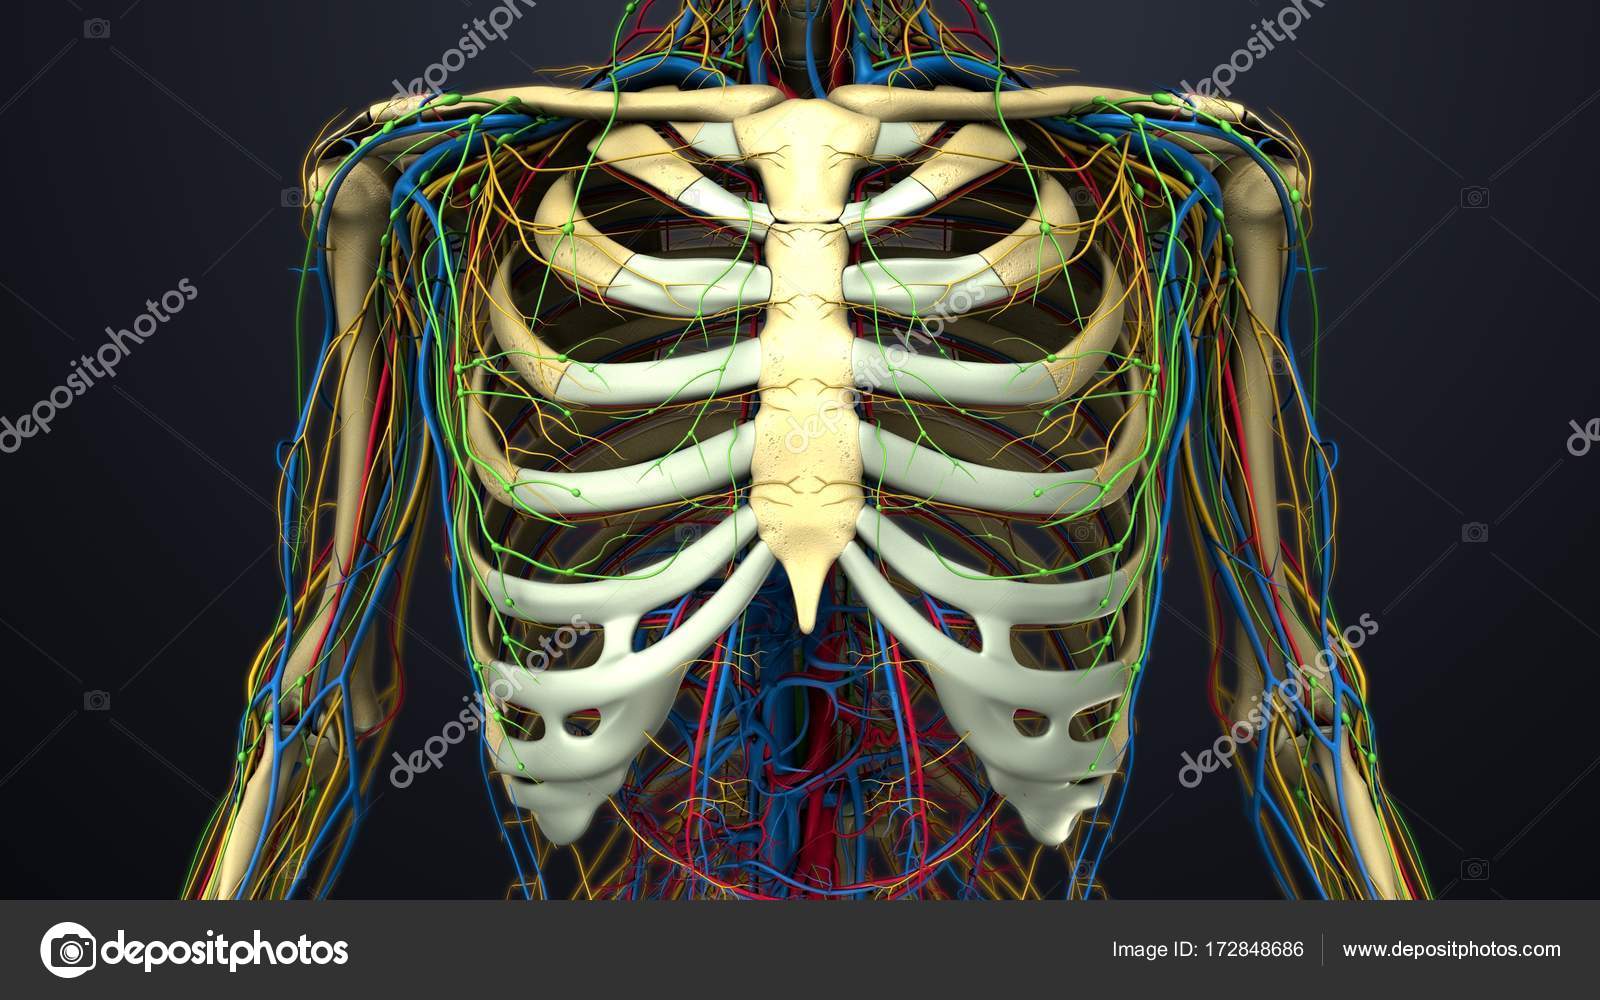 Rib Cage Anatomy / Rib Cage Images Rib Cage Transparent Png Free Download - In this episode we'll learn about the simple structure of the rib cage and have a look at the detailed anatomical parts of the ribs.